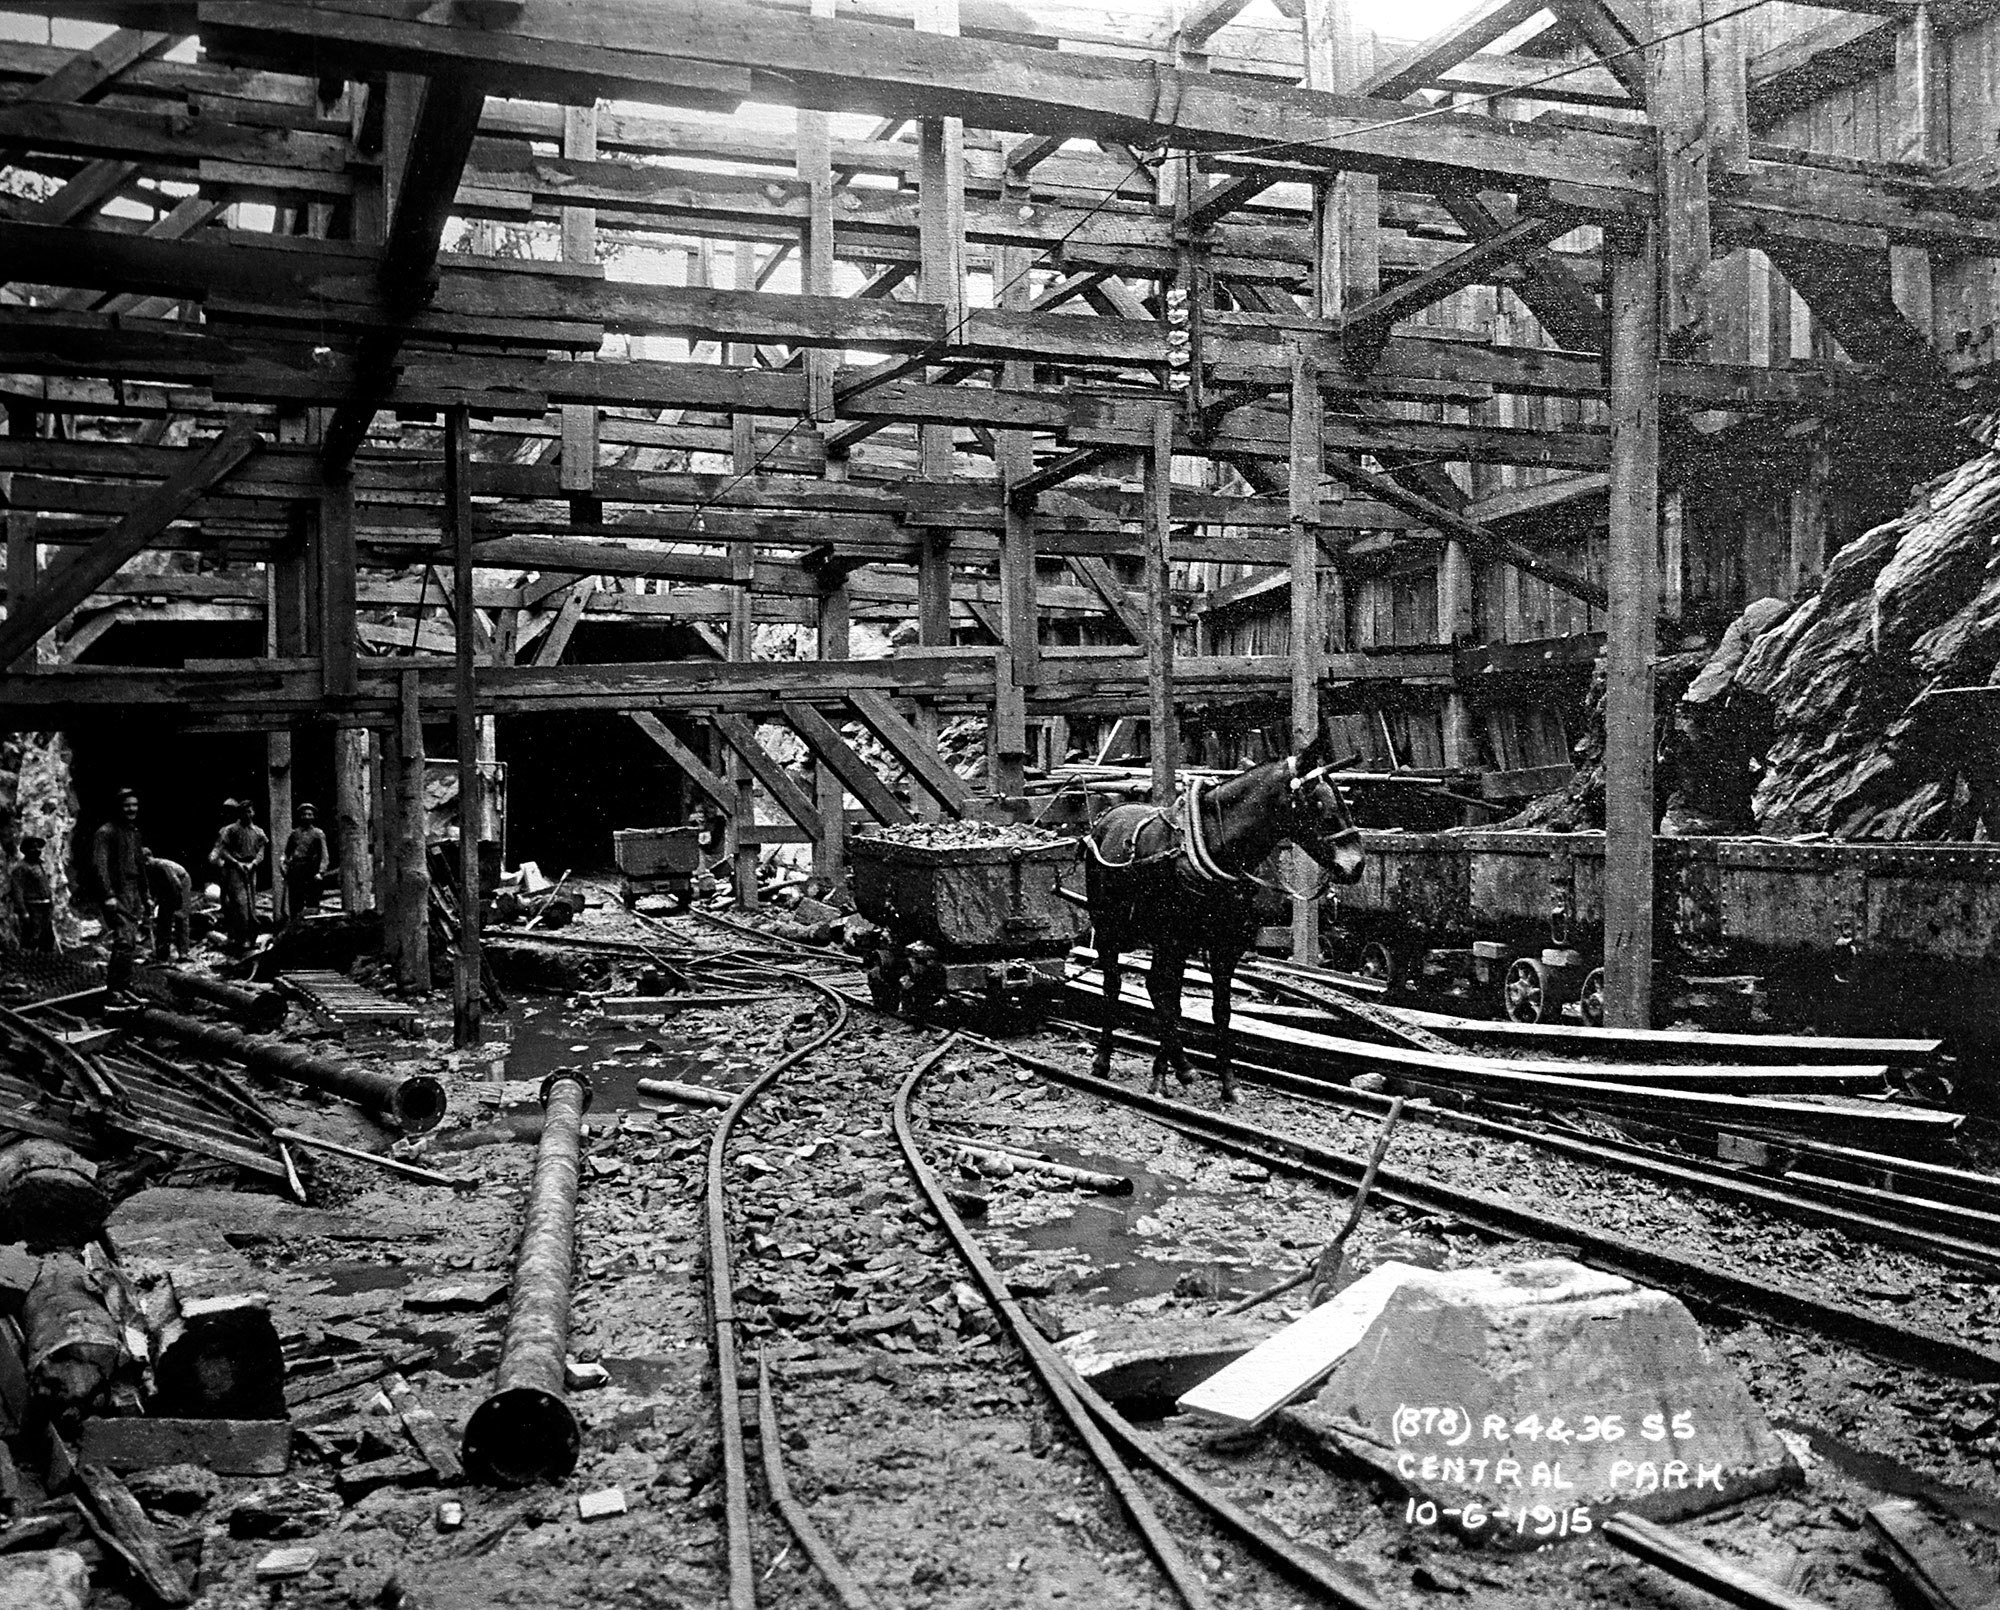 A mule tethered to a cart of debris stands on train tracks, surrounded by wooden scaffolding and rocks